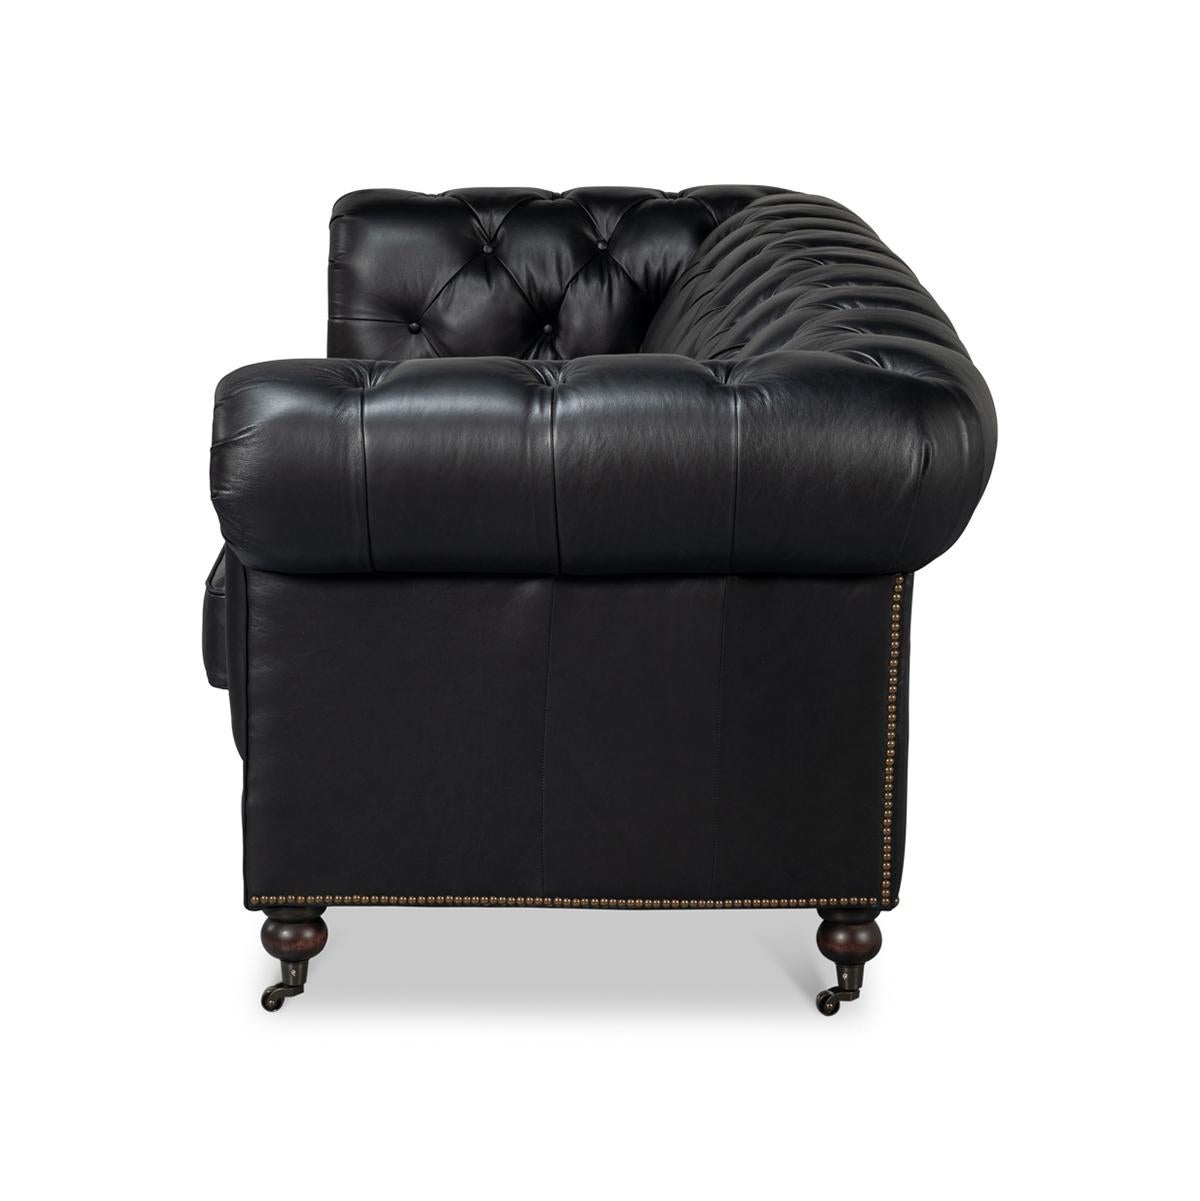 Asian Black Chesterfield Sofa For Sale